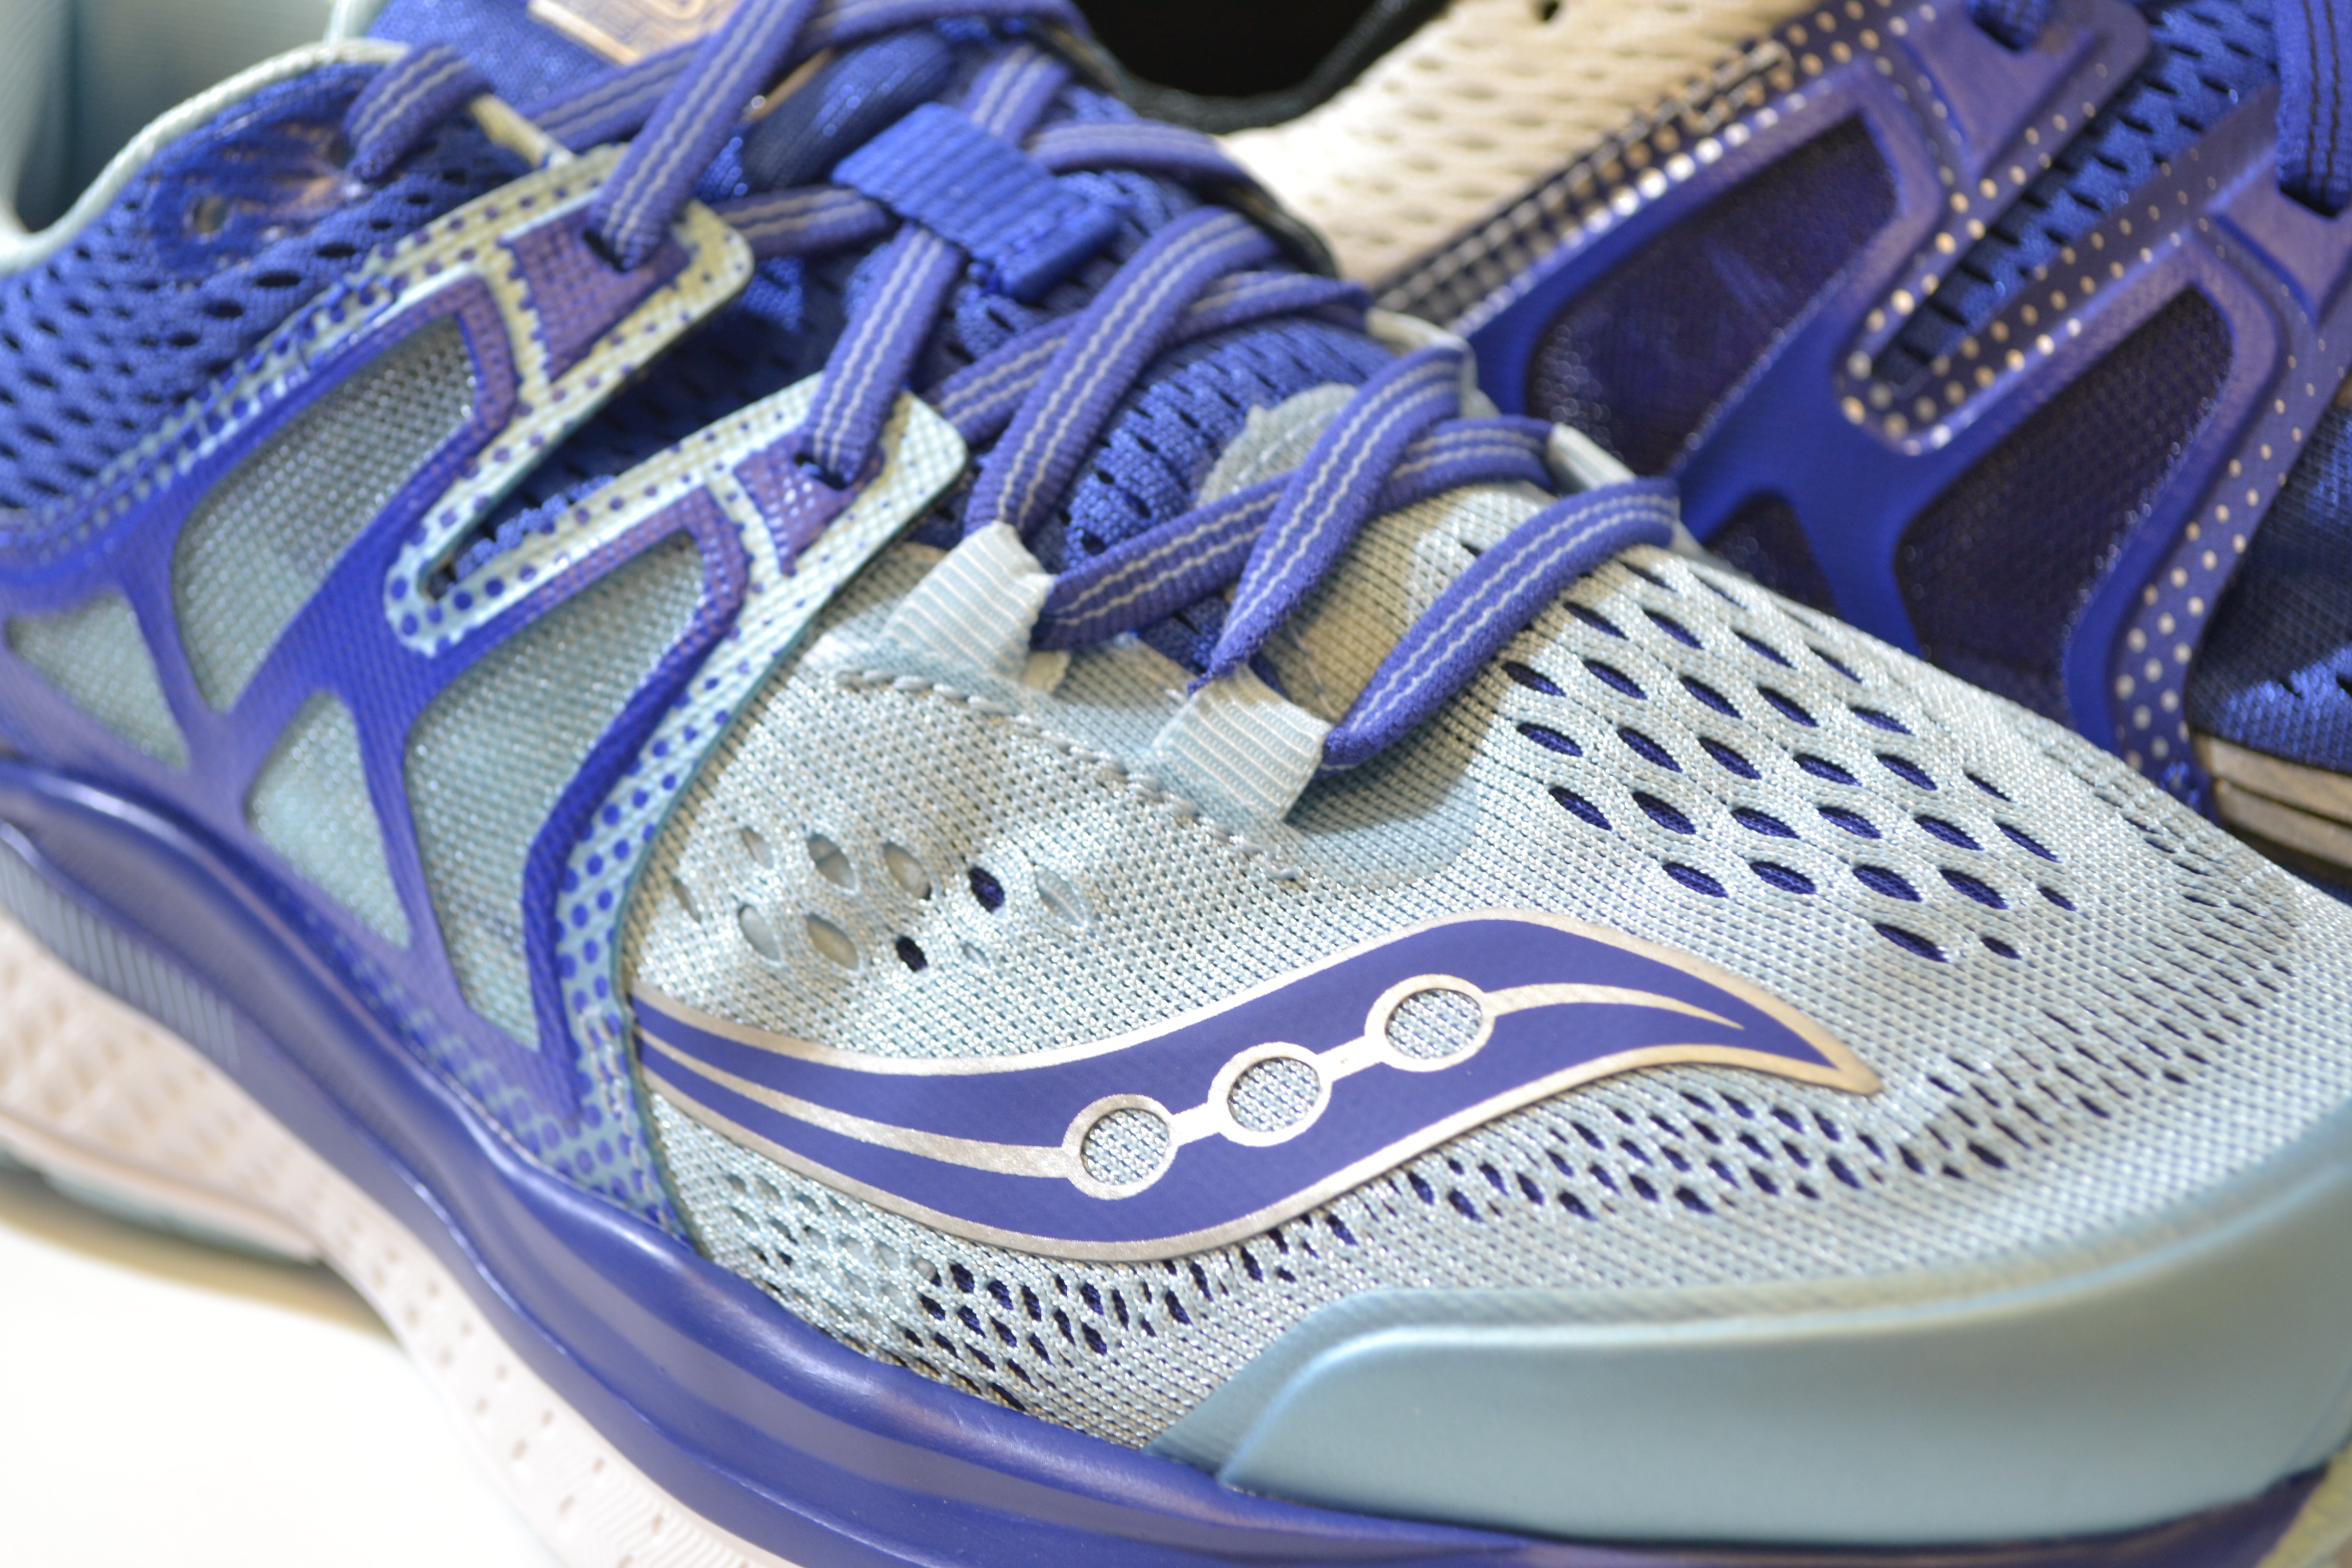 SHOE UPDATE: Saucony Hurricane ISO3 – LIFE IN MOTION